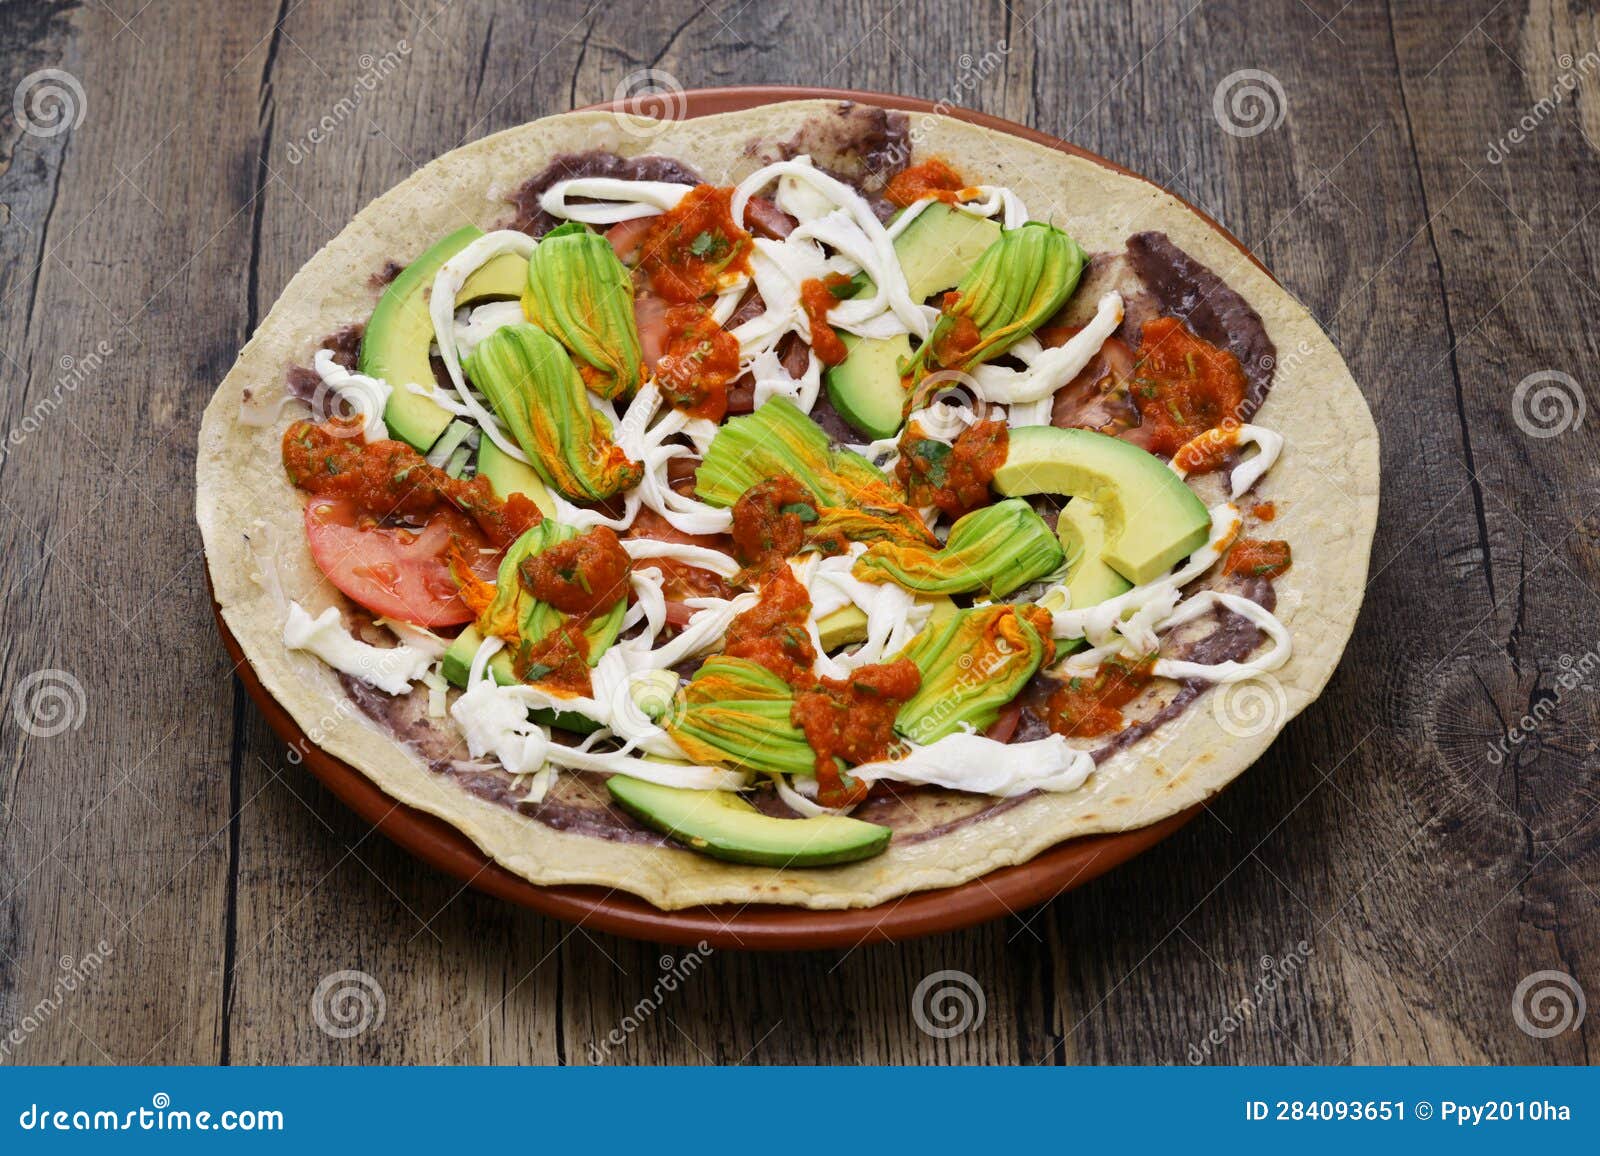 homemade open face vegetable tlayuda(before charcoal grilling), mexican pizza